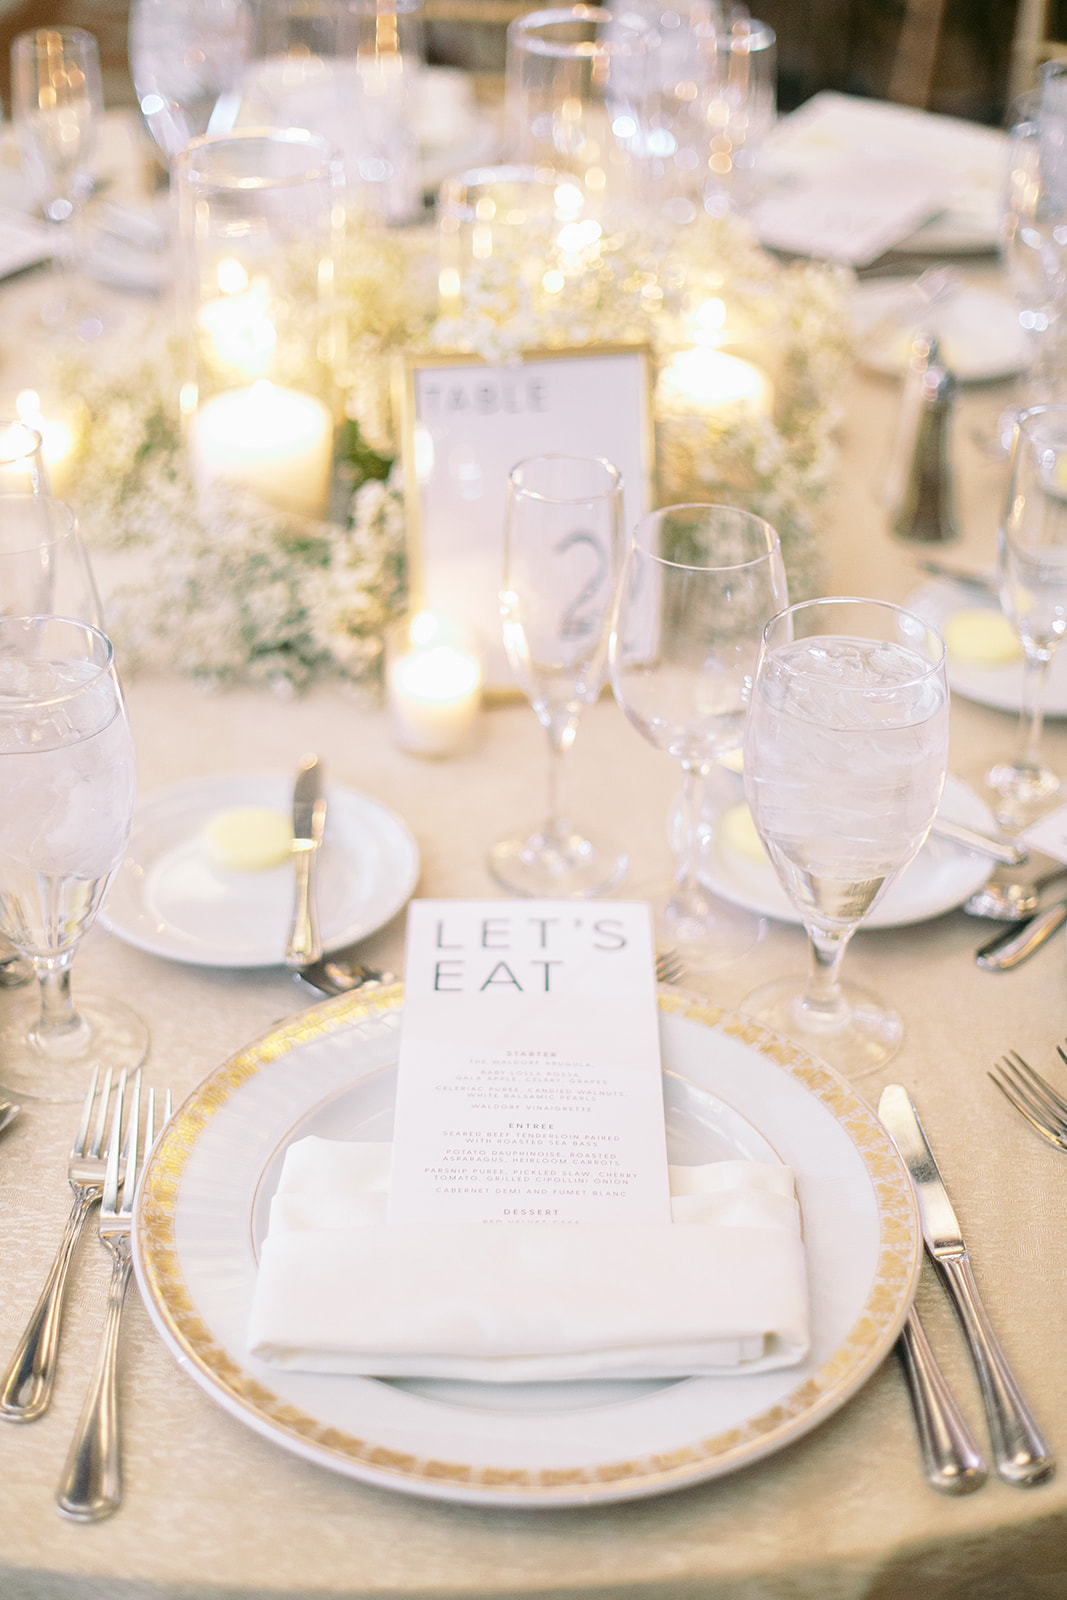 White and gold place setting at wedding reception.